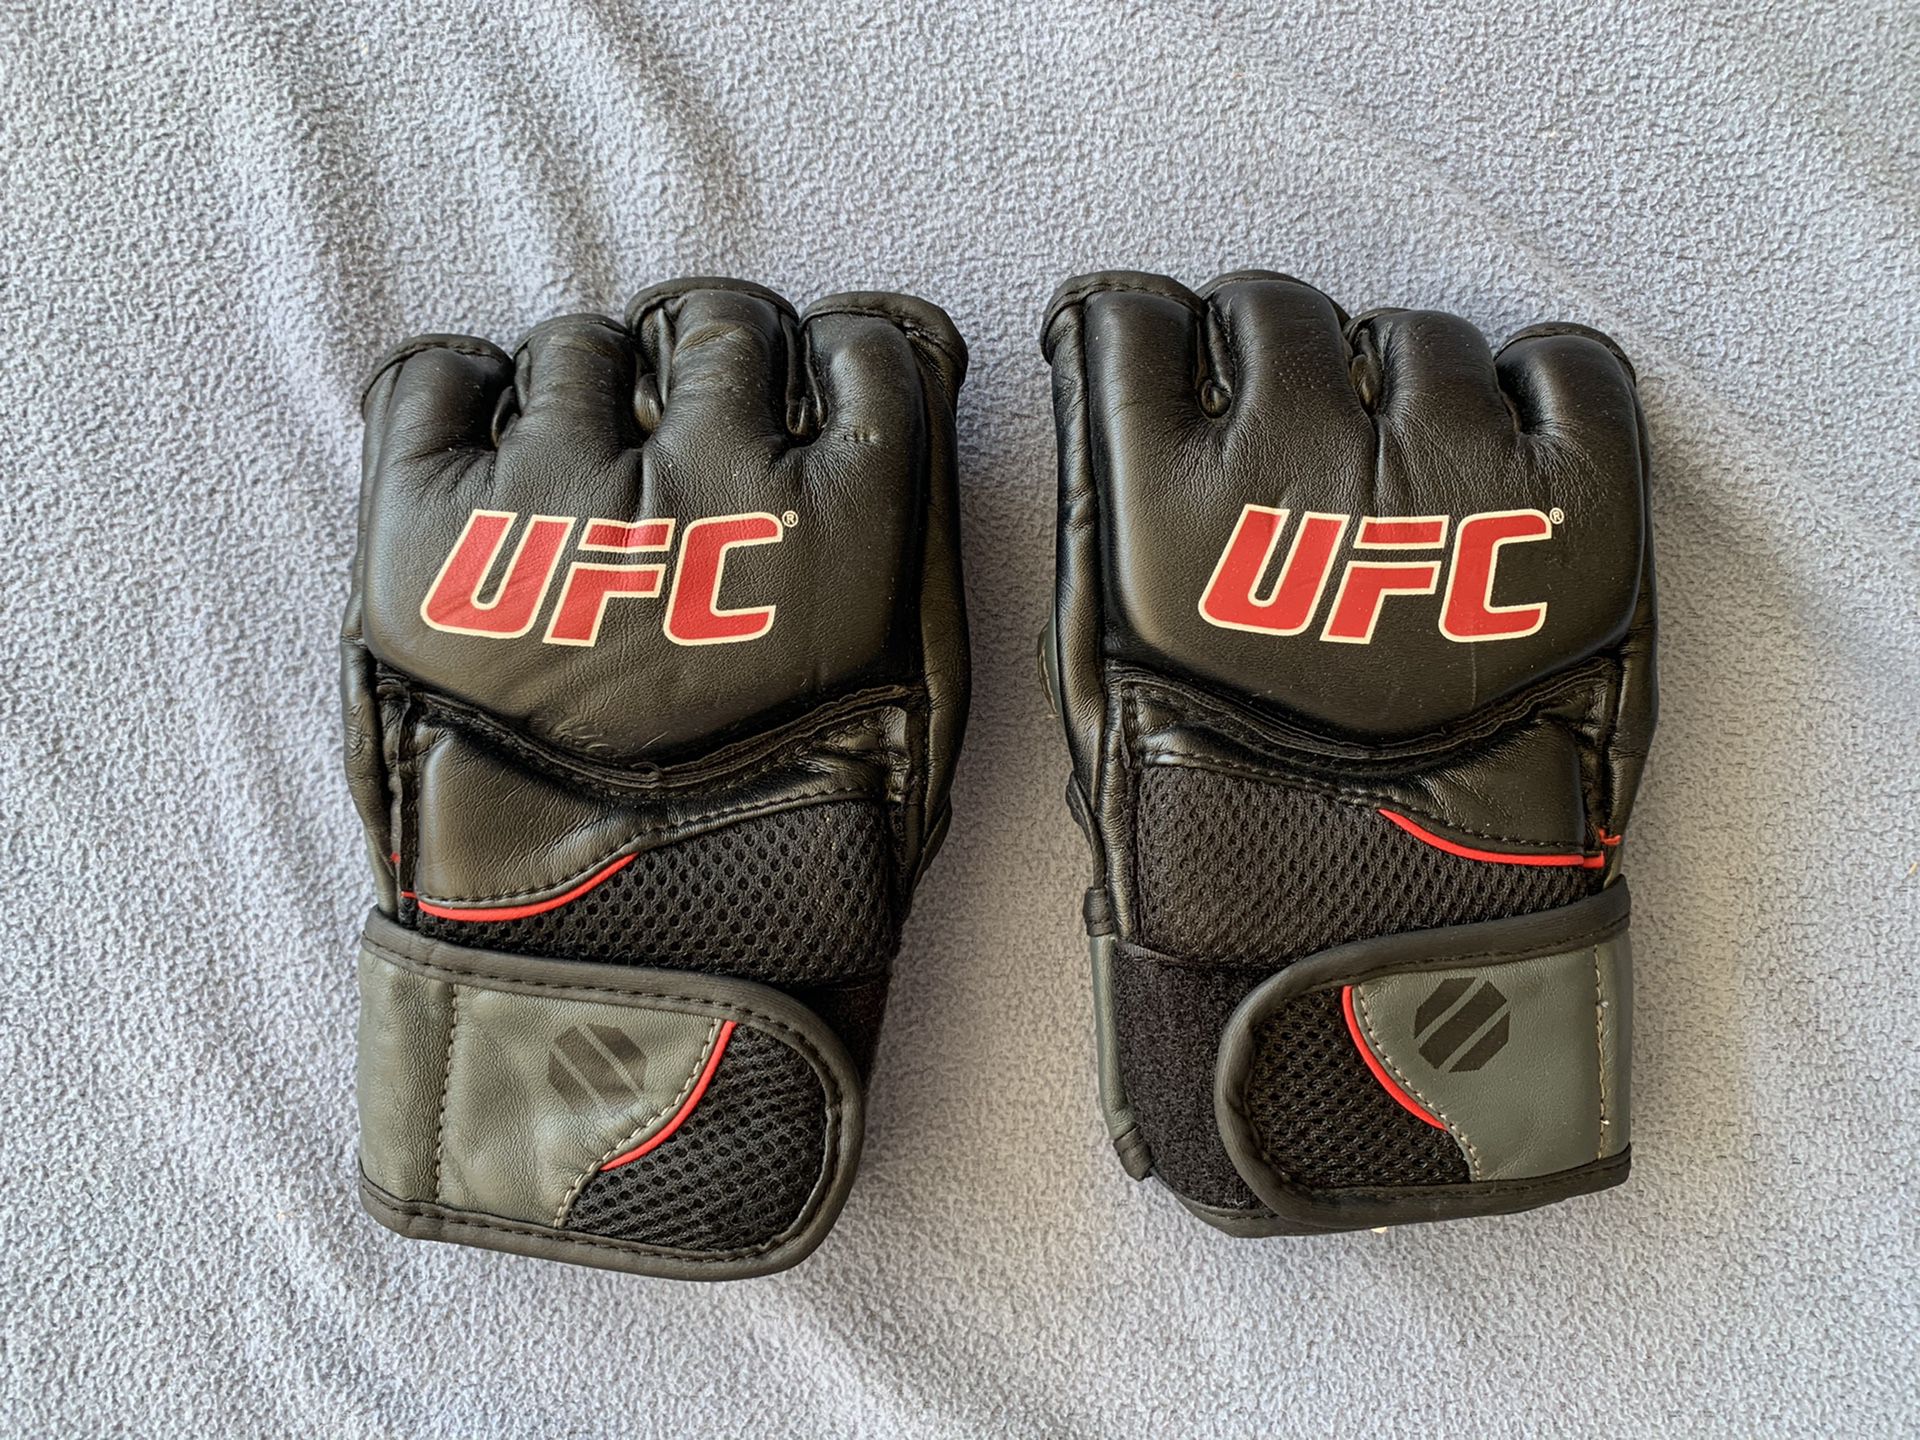 UFC MMA fighting gloves size S/M